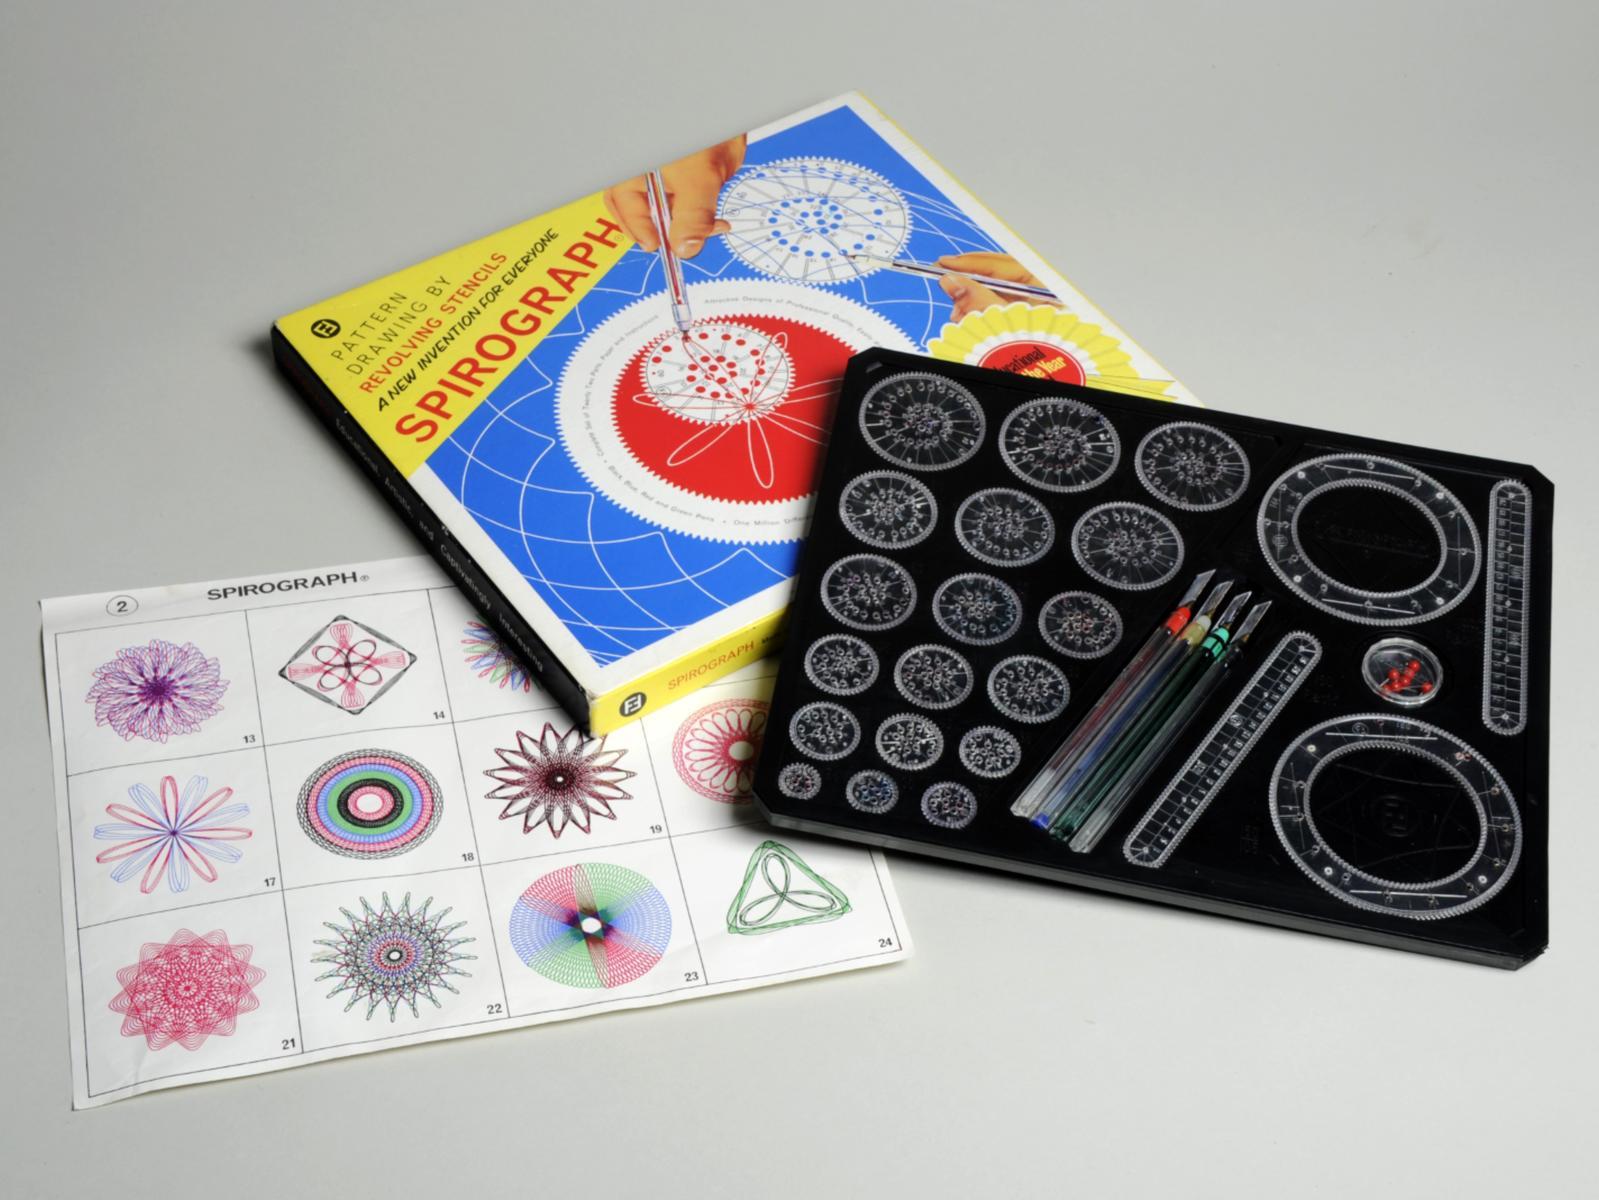 The Spirograph game was developed by Leeds engineer Denys Fisher in the mid-1960s and helped a generation of children unleash their creative potential. The